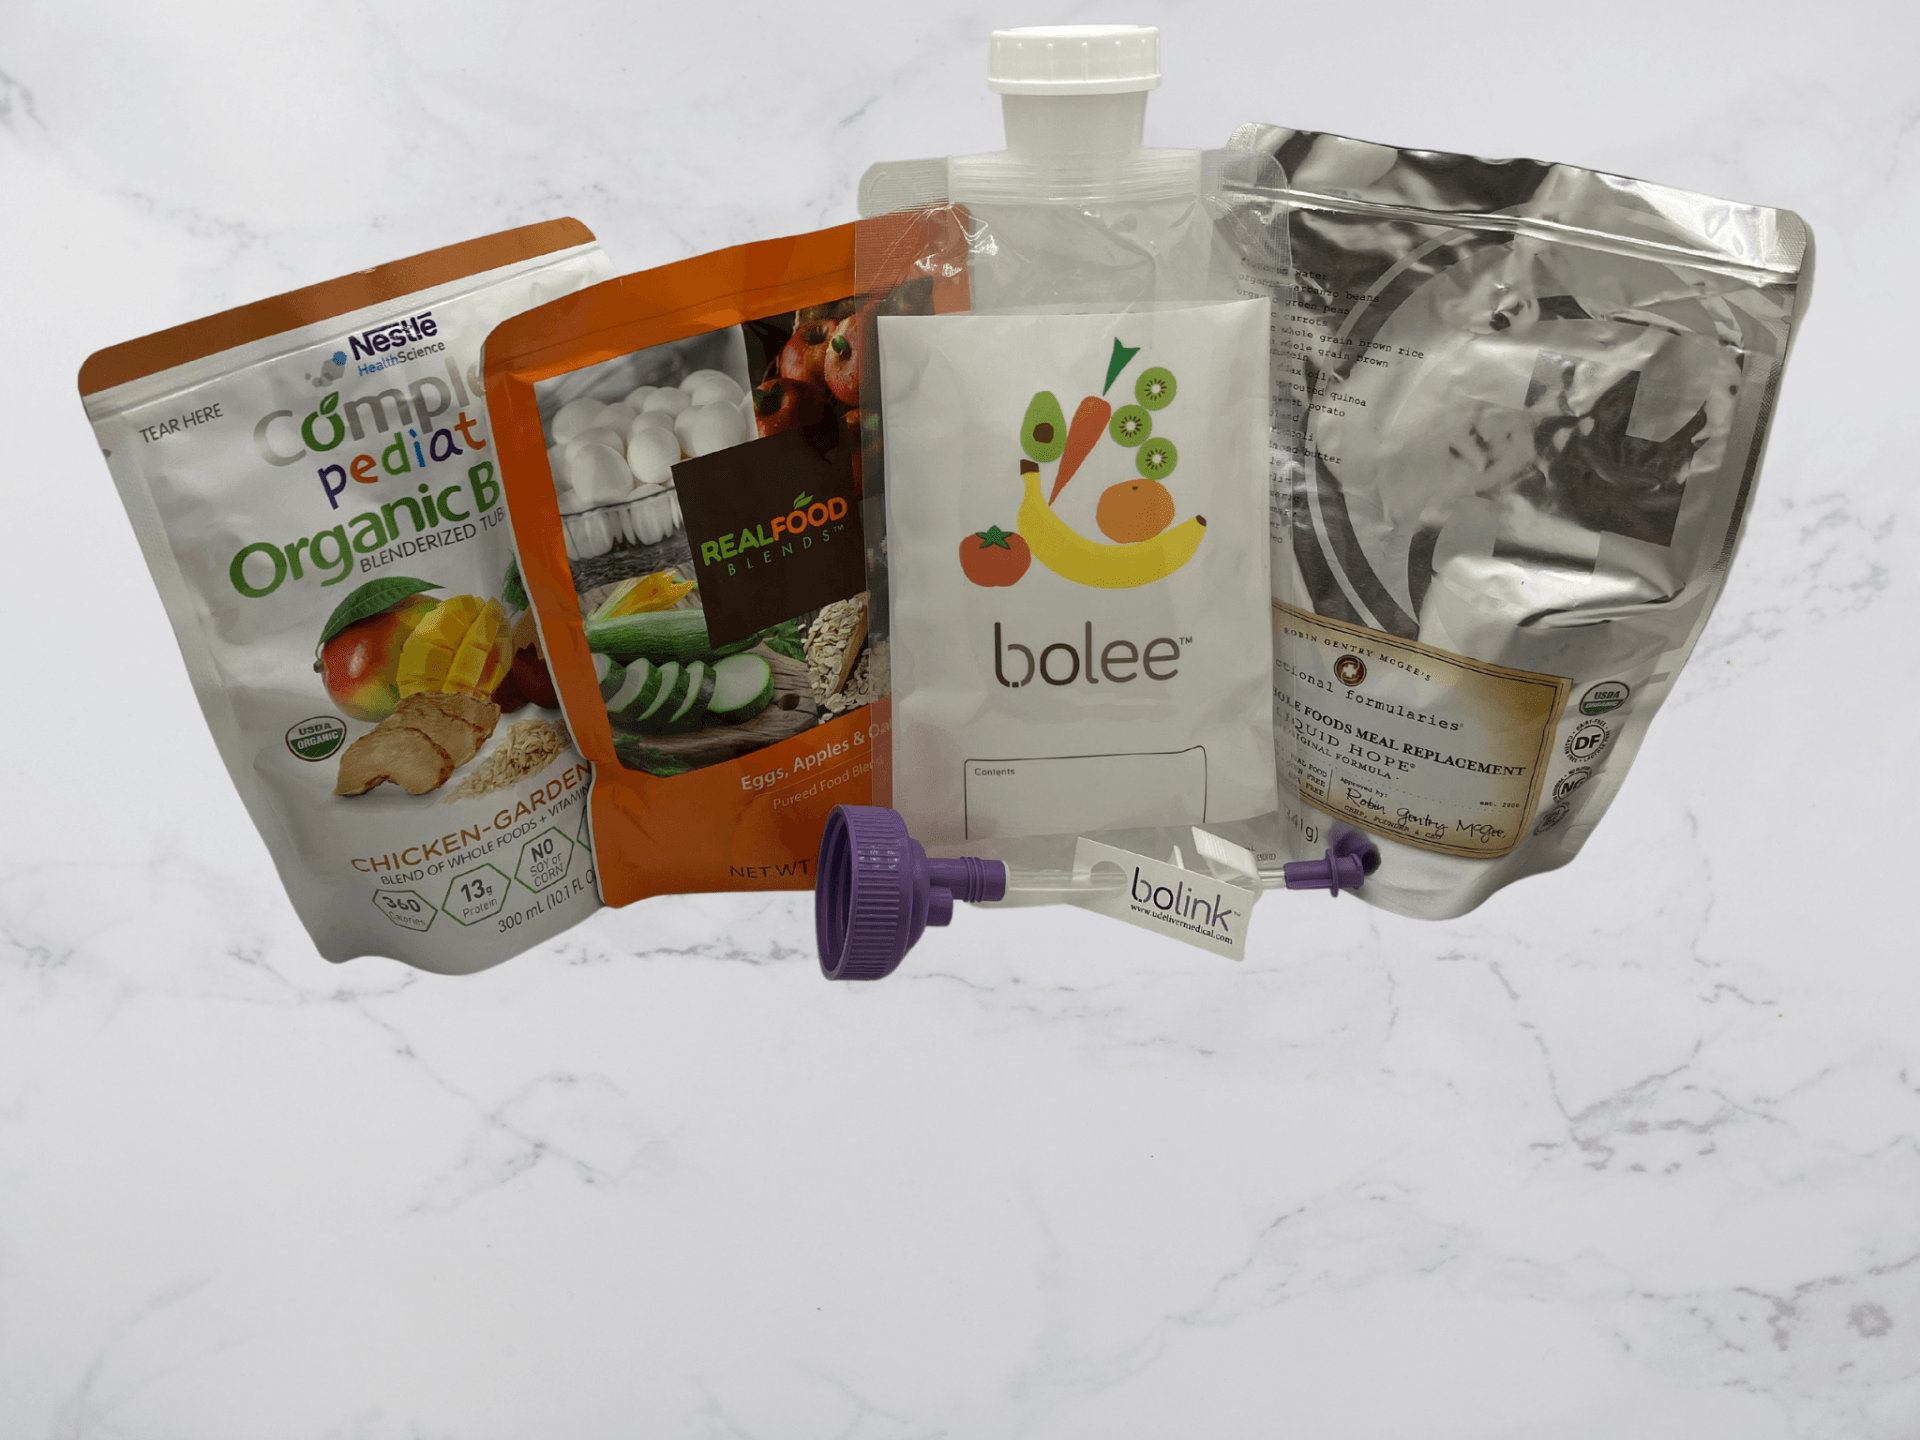 Bolee Bag with pouches from Functional Formularies, Compleat Organic Blends and Real Food Blends